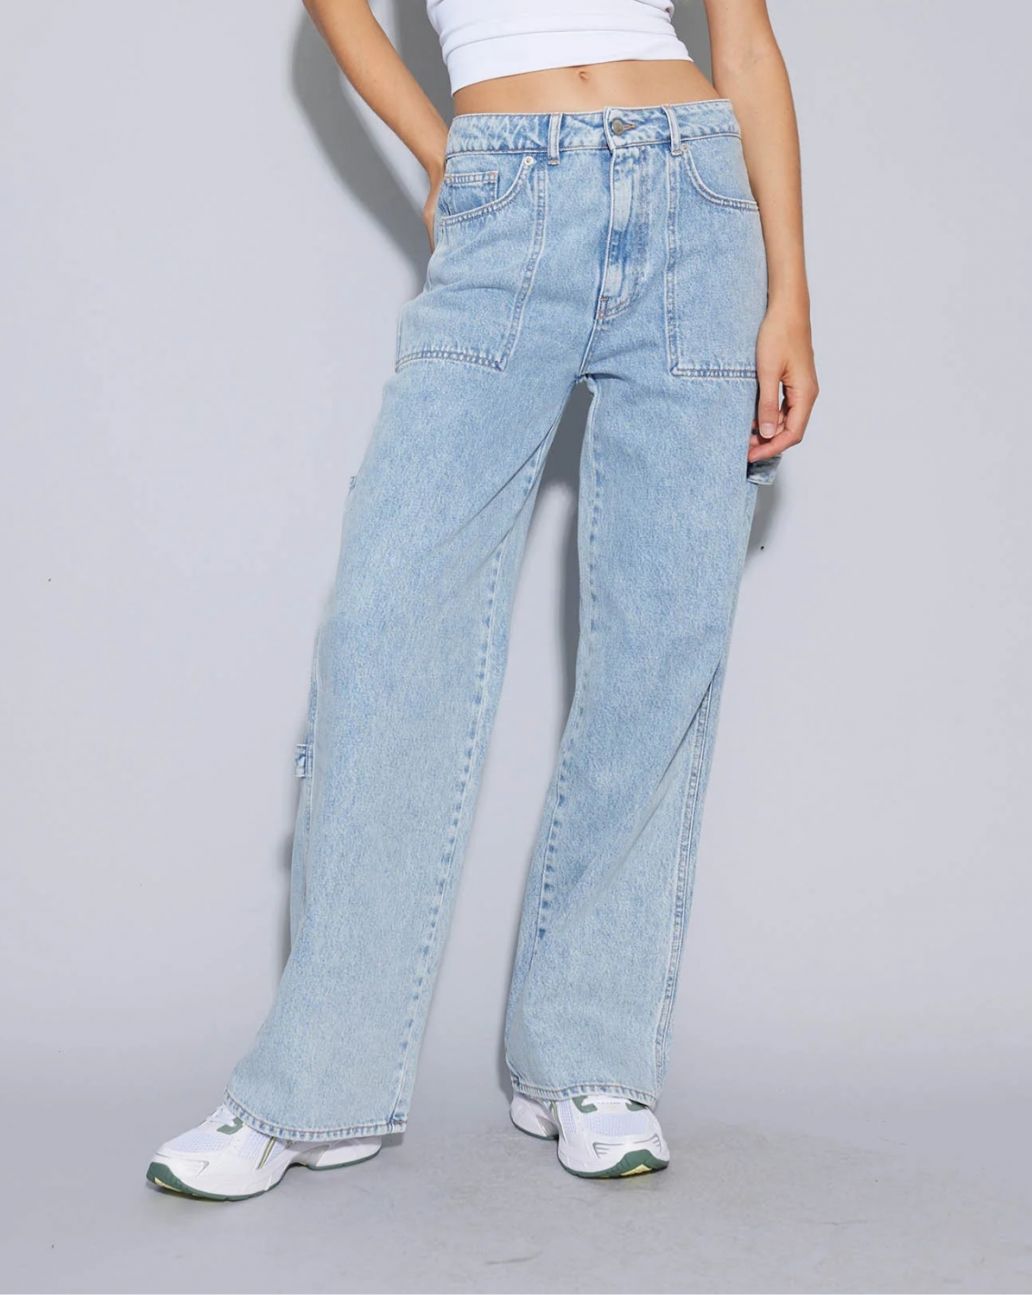 Oval Square Player Jeans 0105